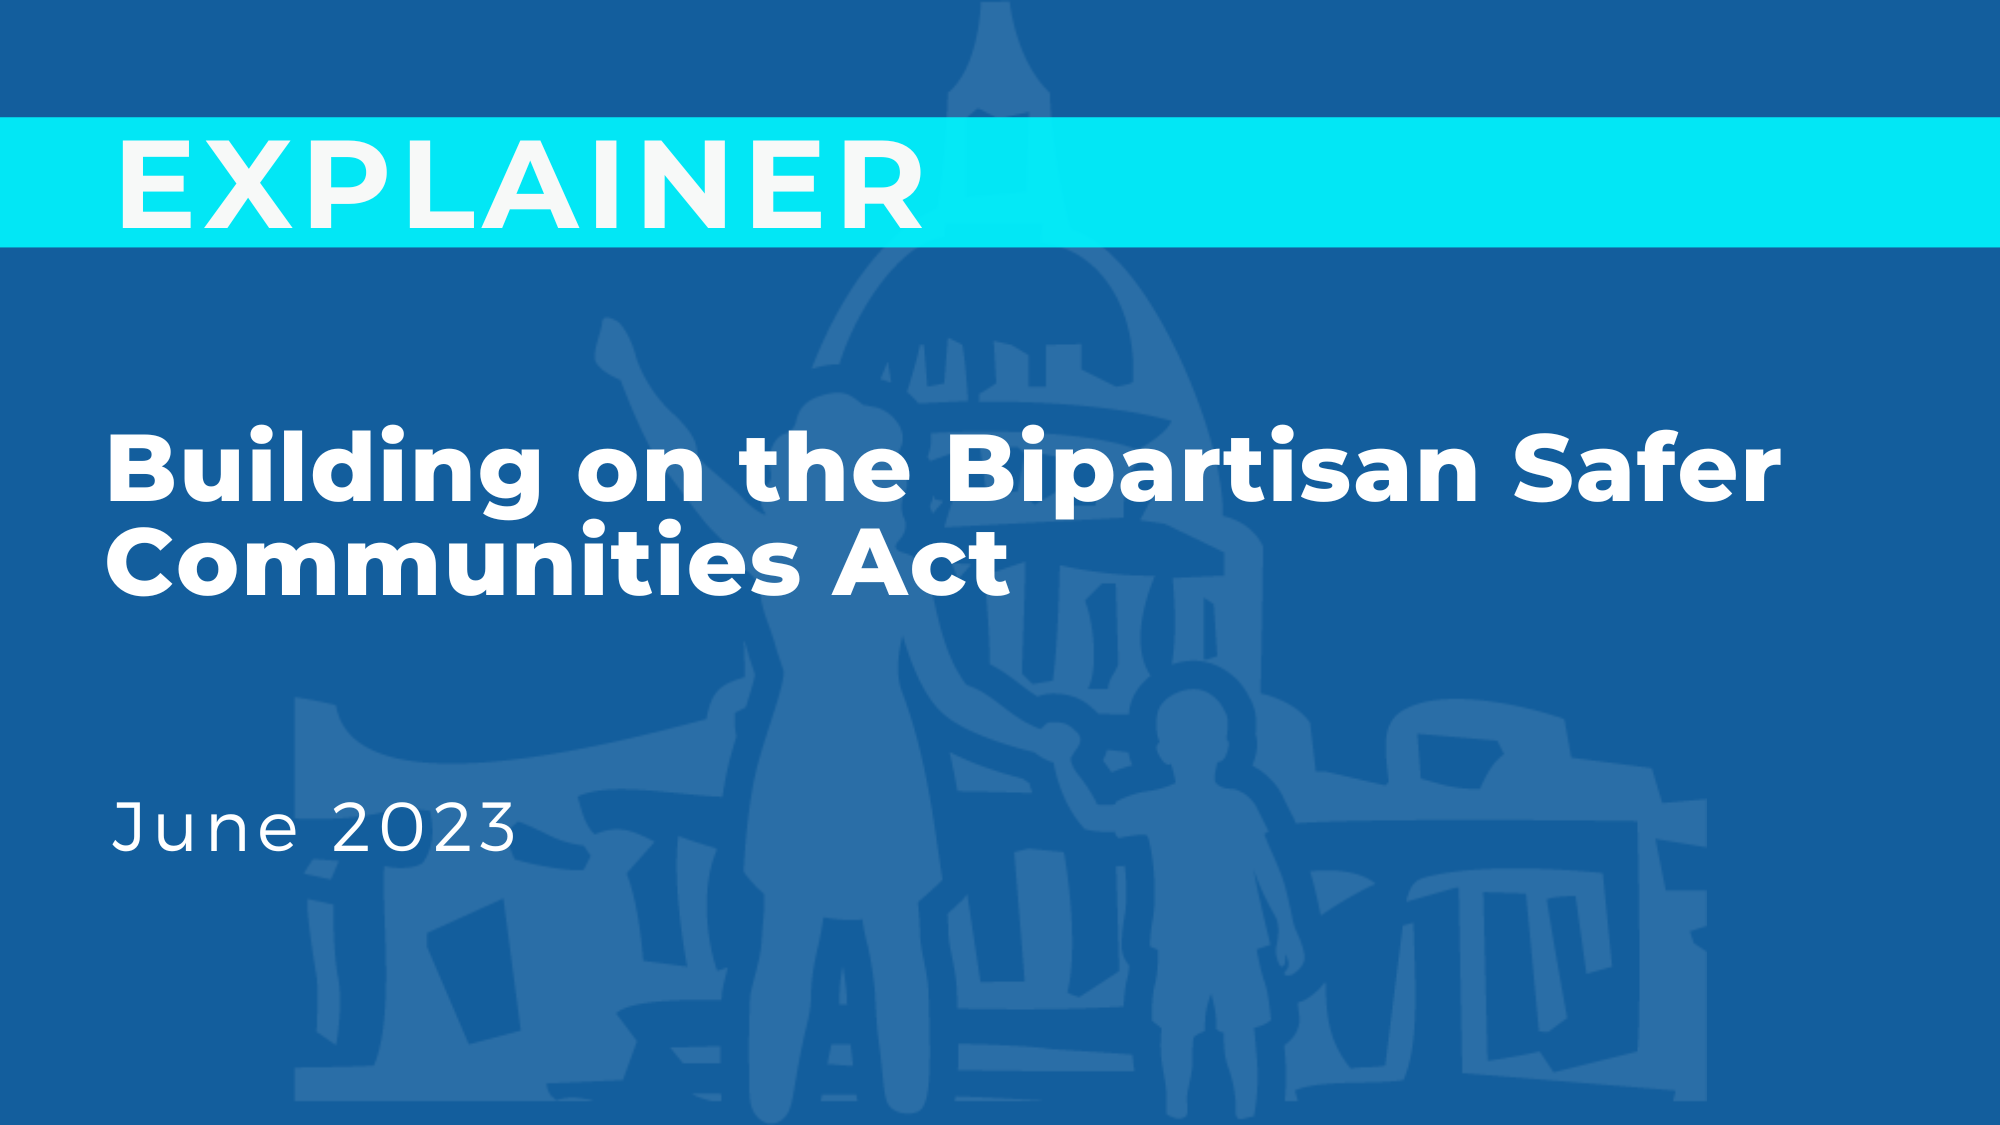 Building on the Bipartisan Safer Communities Act